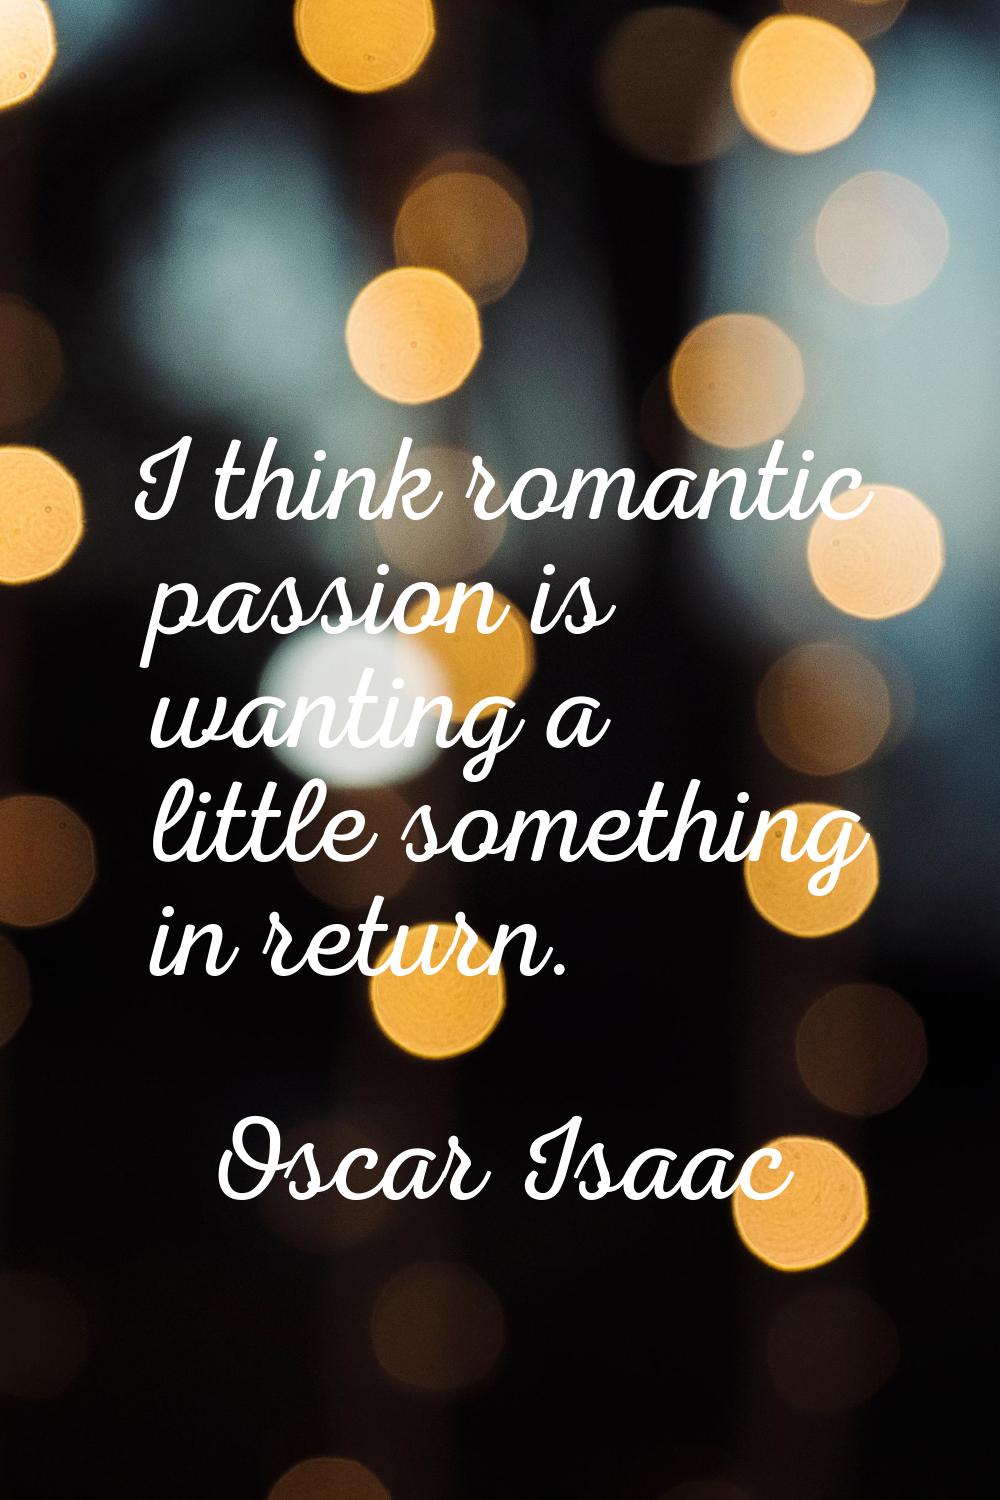 I think romantic passion is wanting a little something in return.